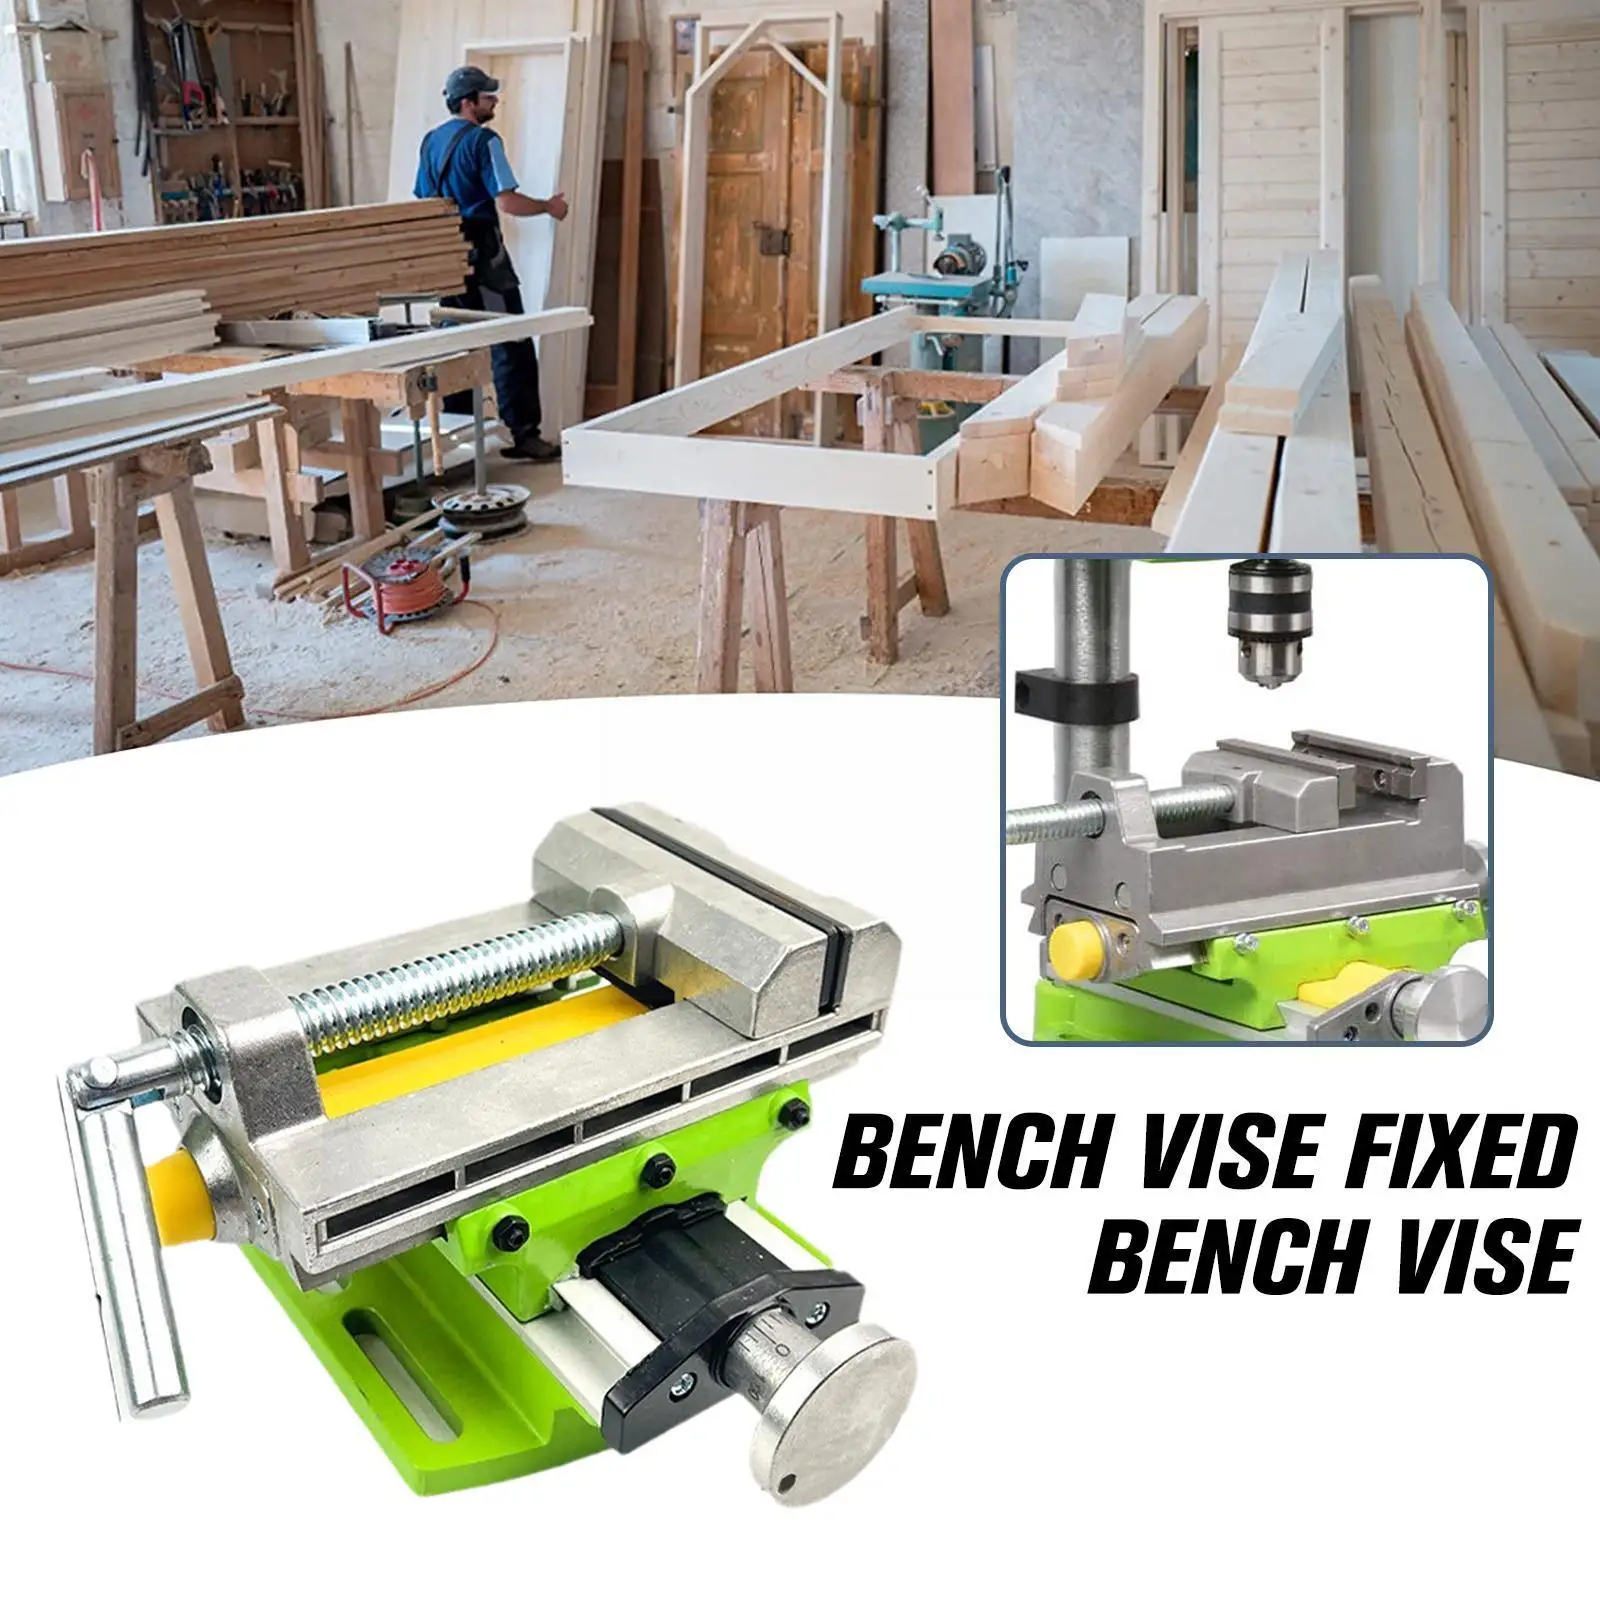 

Small Fixed Vise Multifunct Precision Industrial Repair Craft Table Mold Work Fixed Heavy Grade Fixed Duty Vice Diy B B6s5